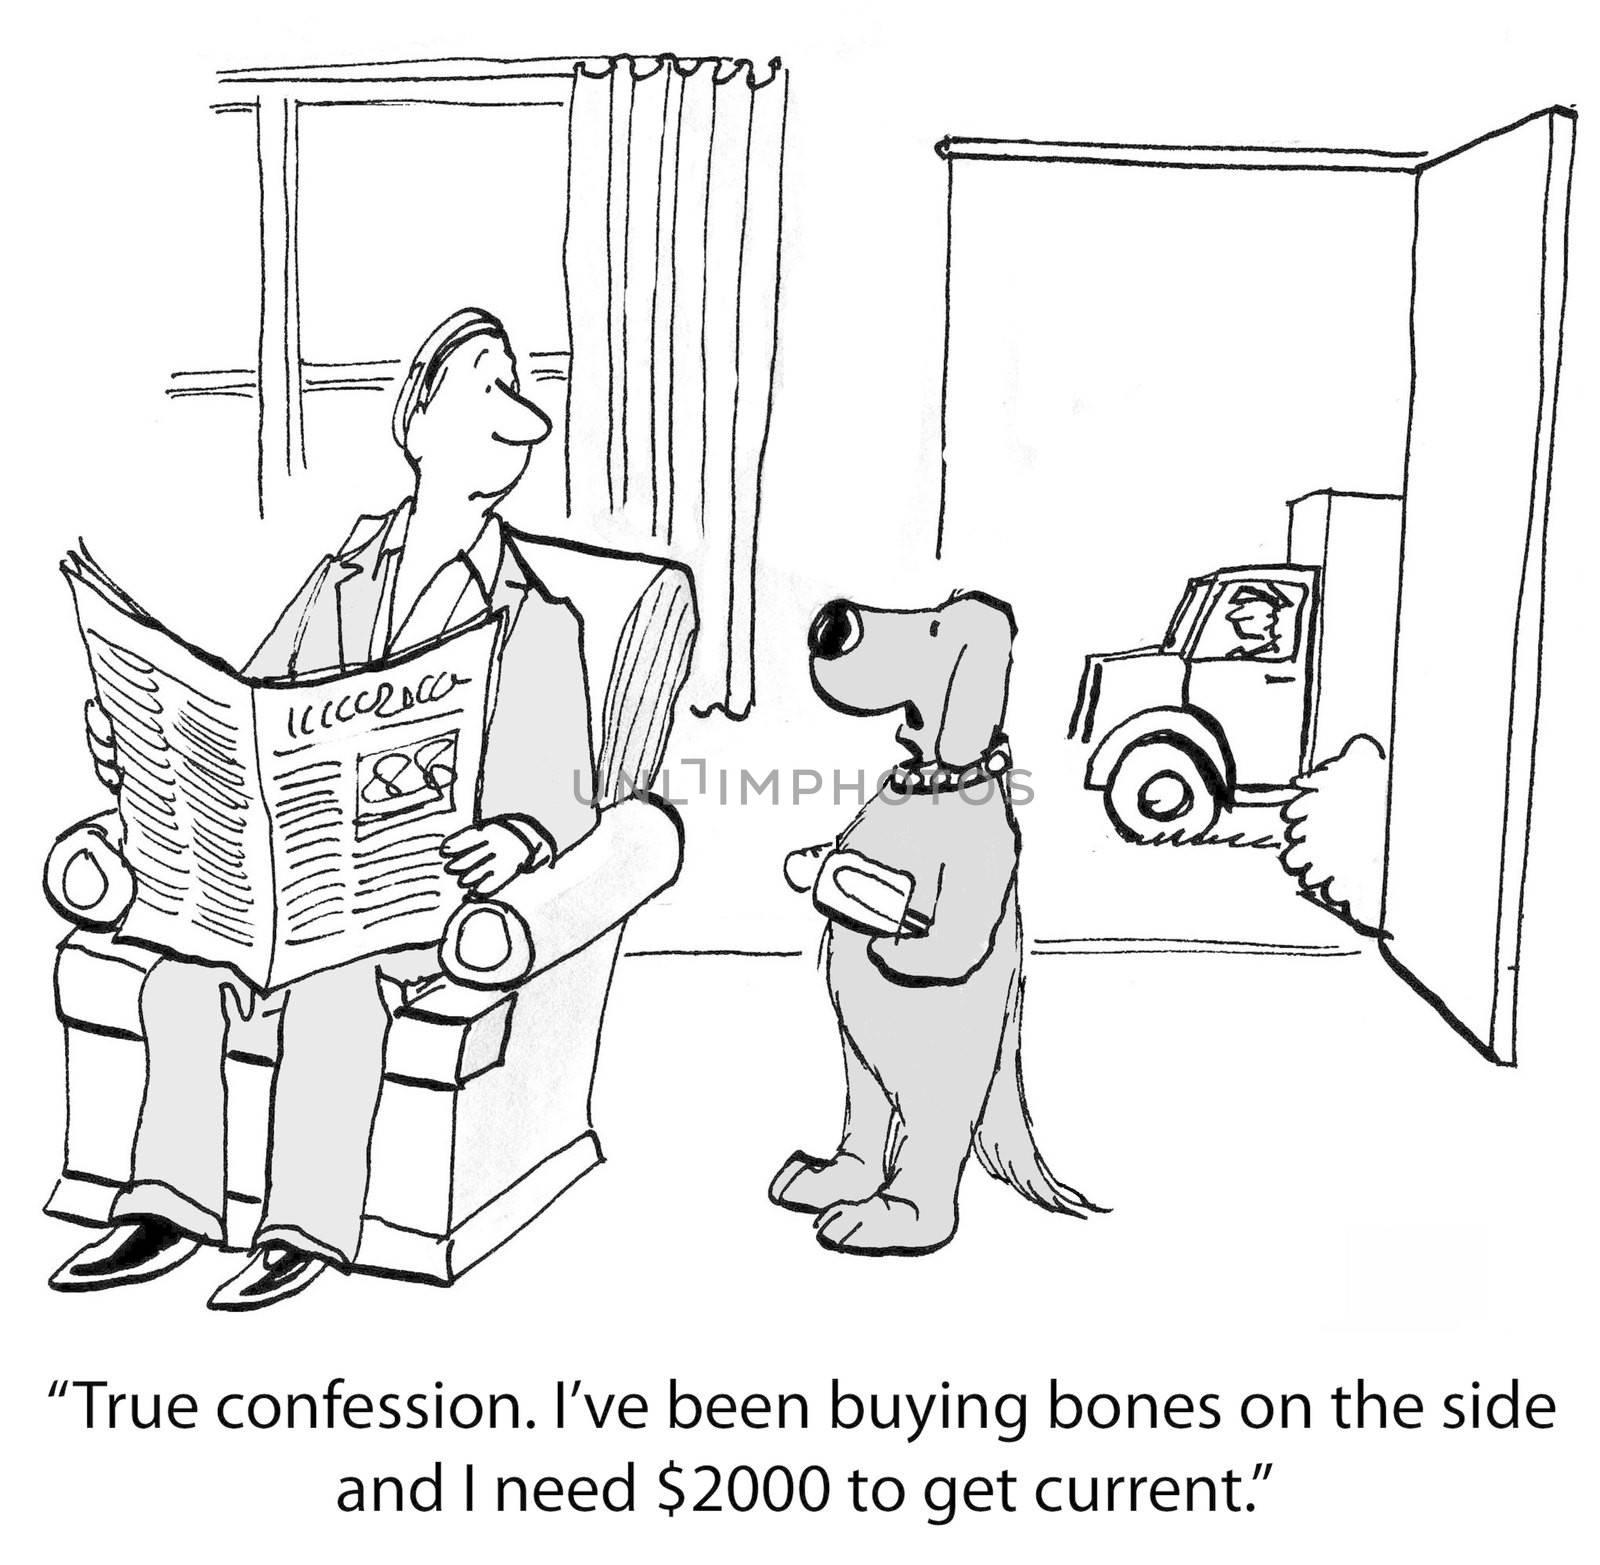 "True confession. I've been buying bones on the side and I need $2000 to get current."